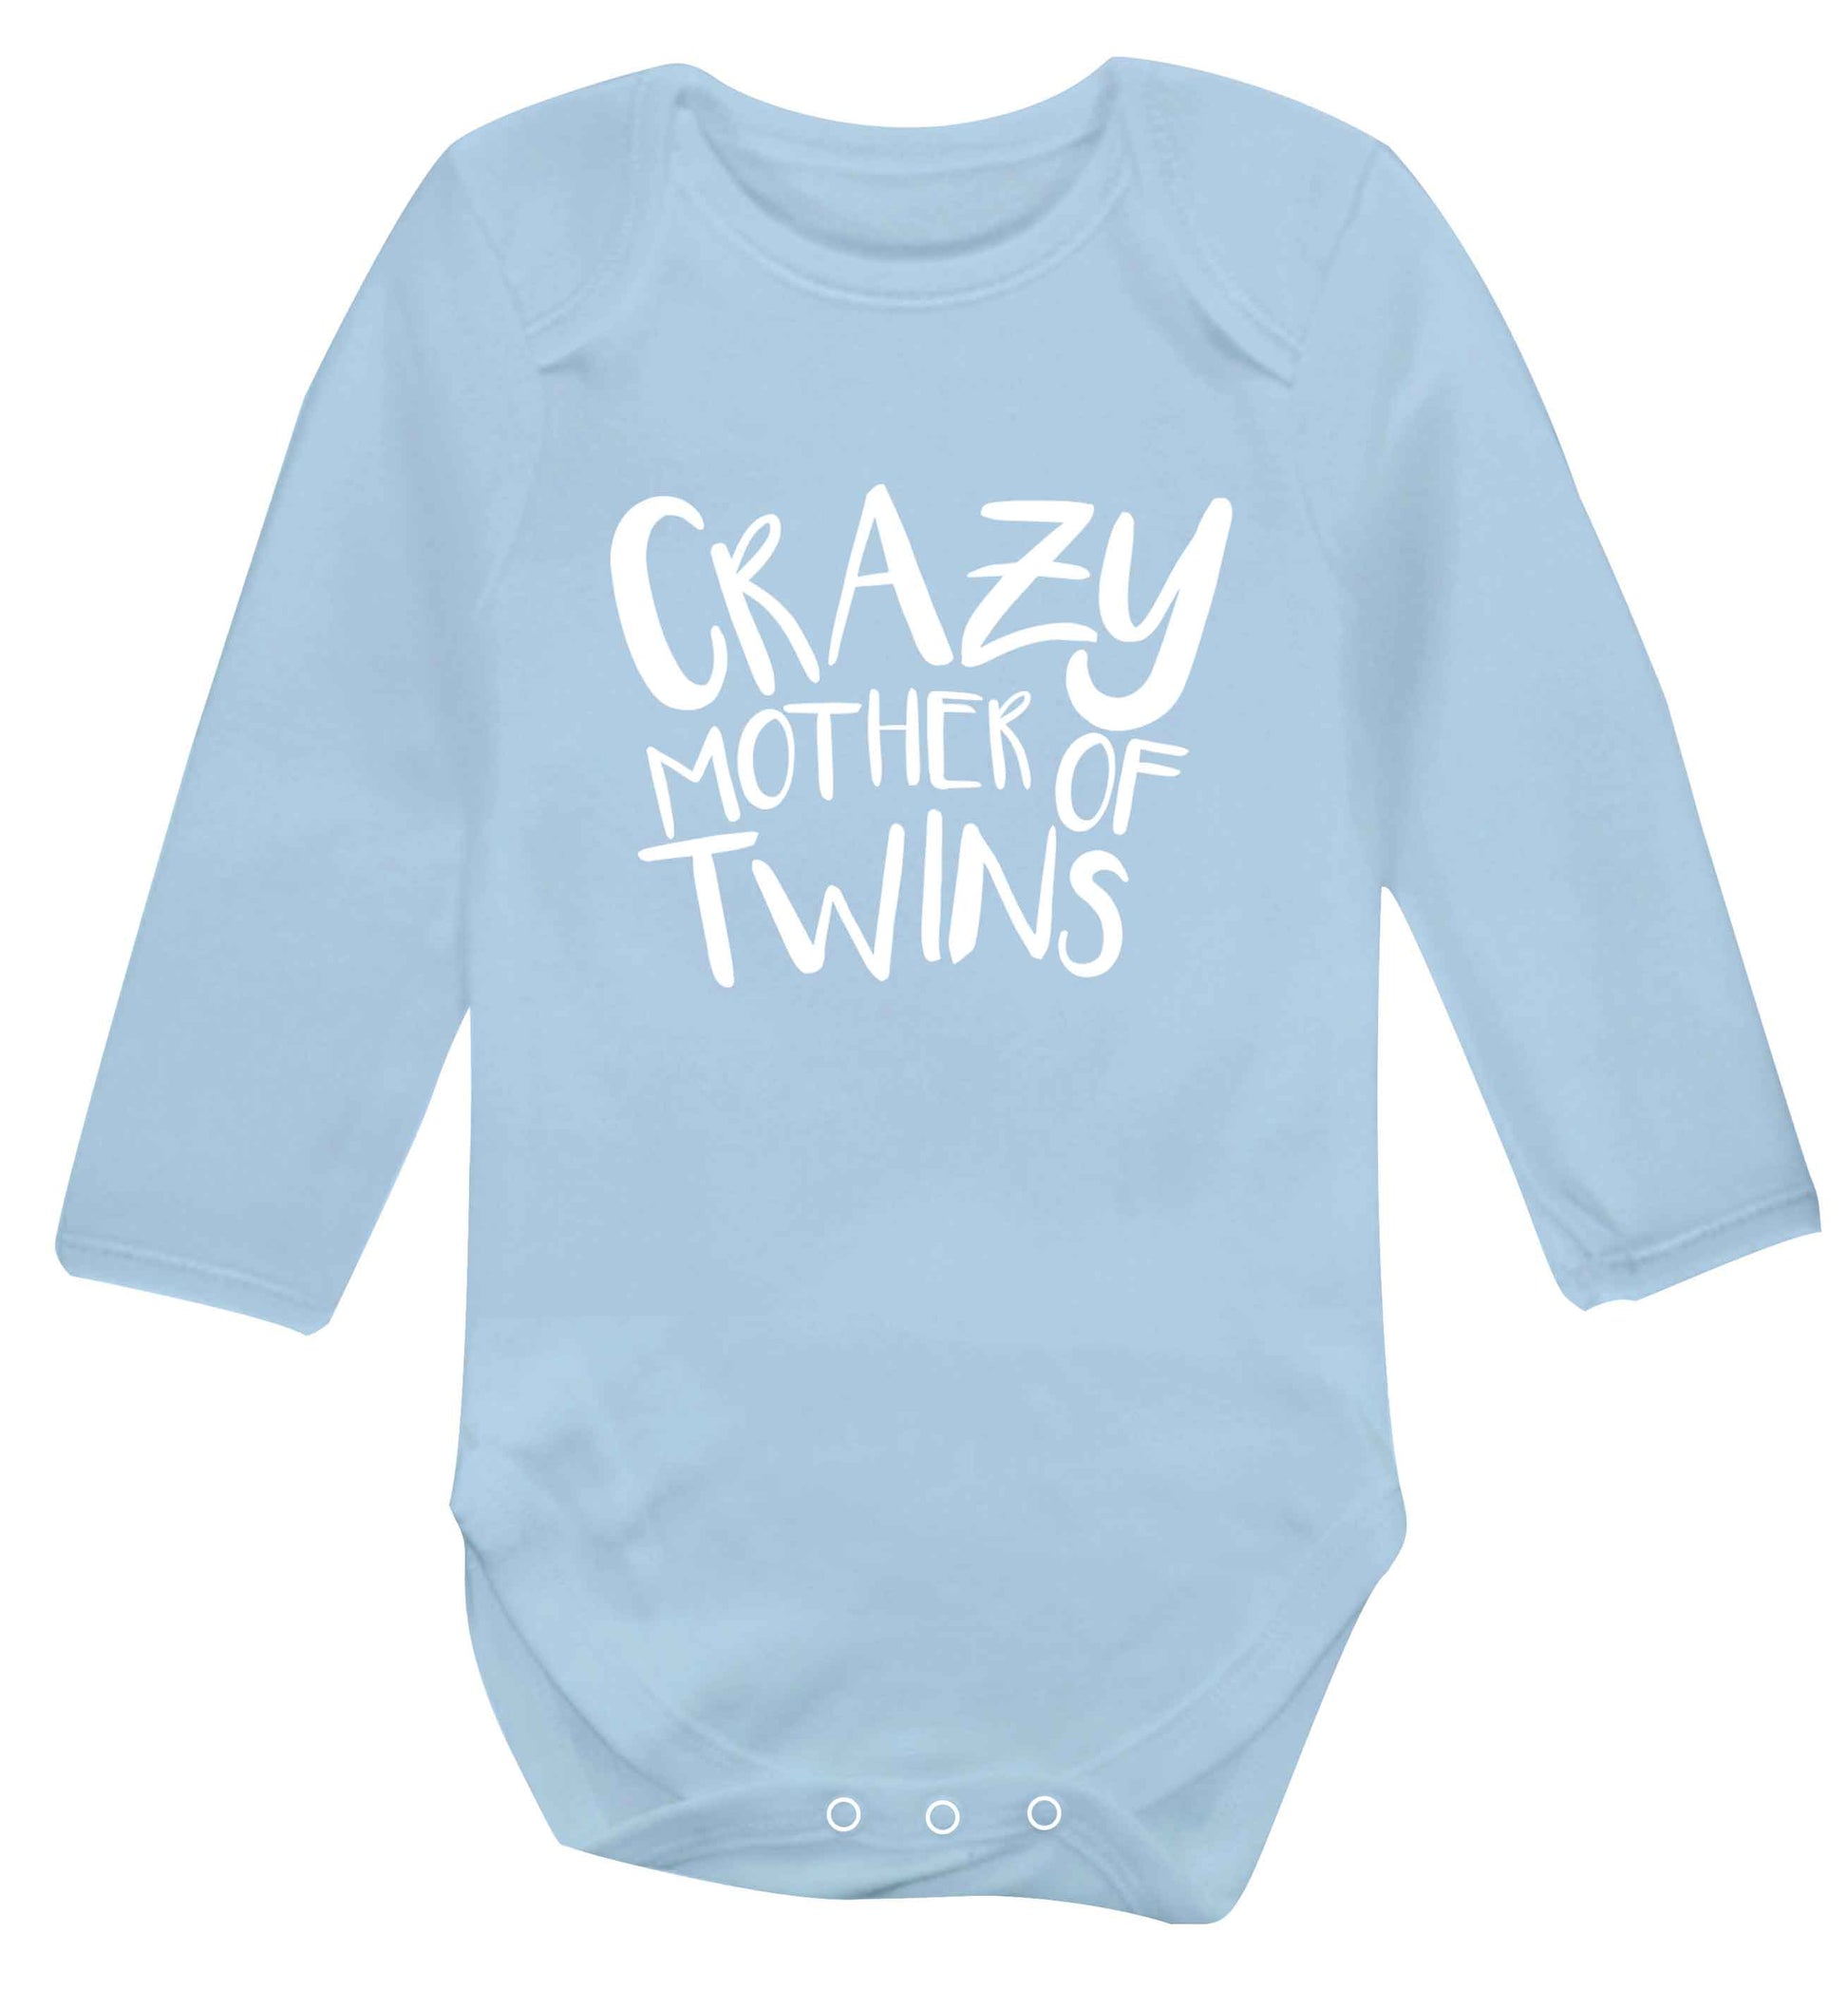 Crazy mother of twins baby vest long sleeved pale blue 6-12 months